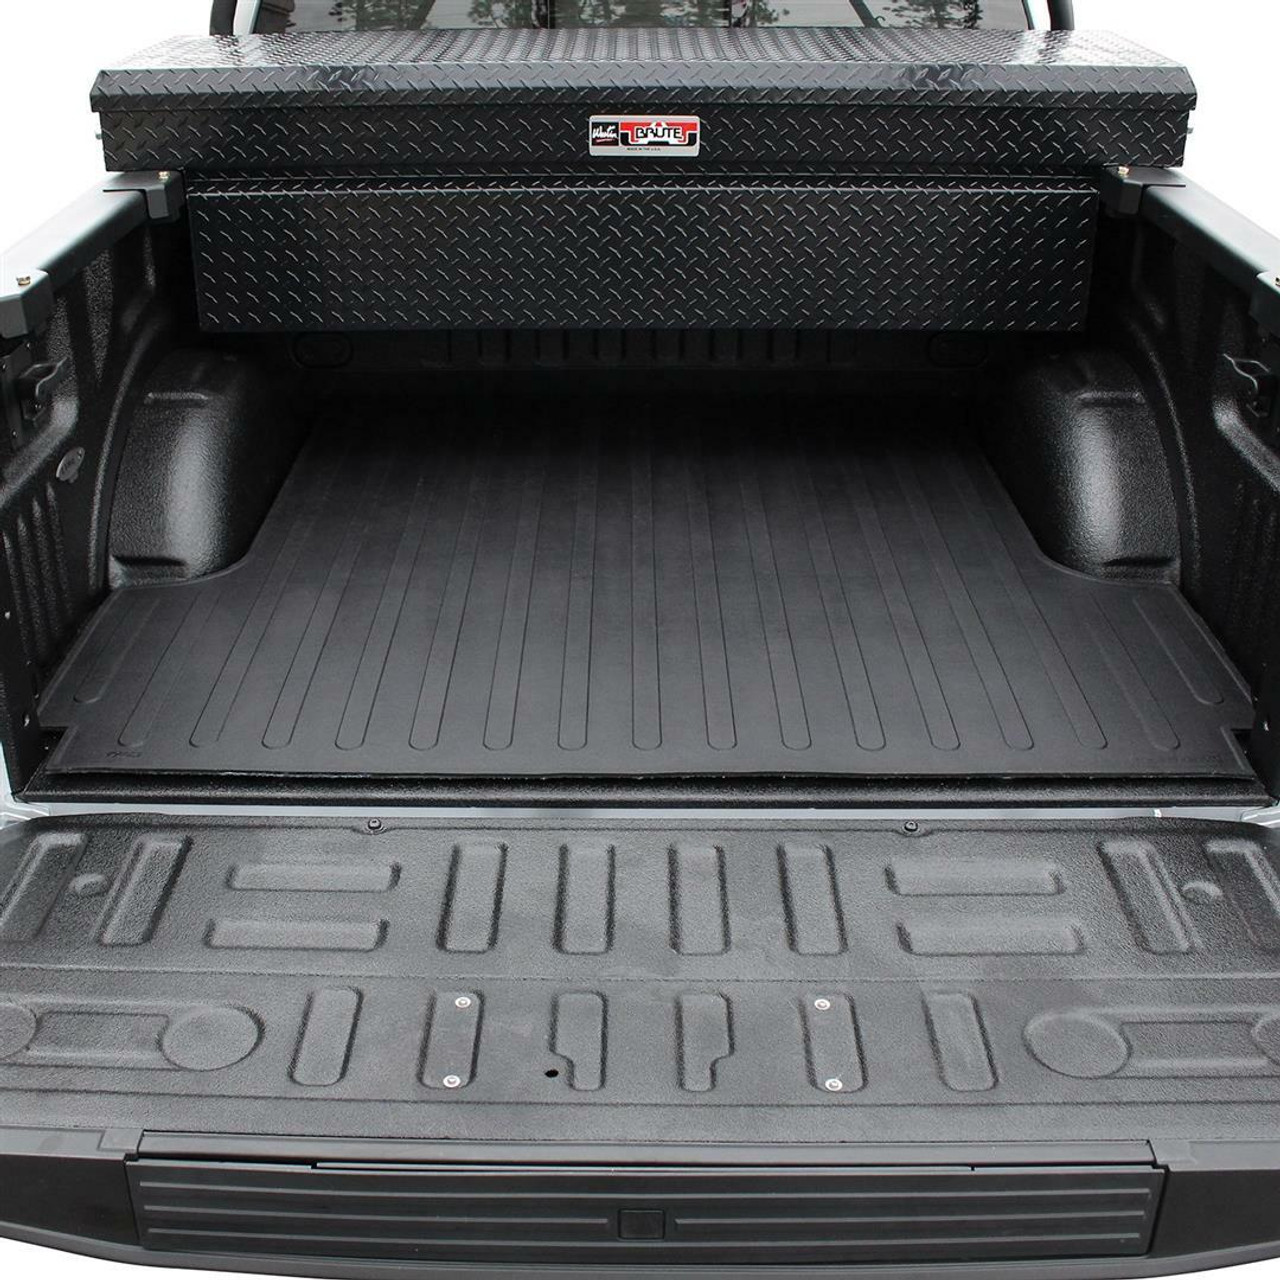 Westin Truck Bed Mat Fits 2000-2006 Toyota Tundra 6.5' Bed  50-6245  63"x76"